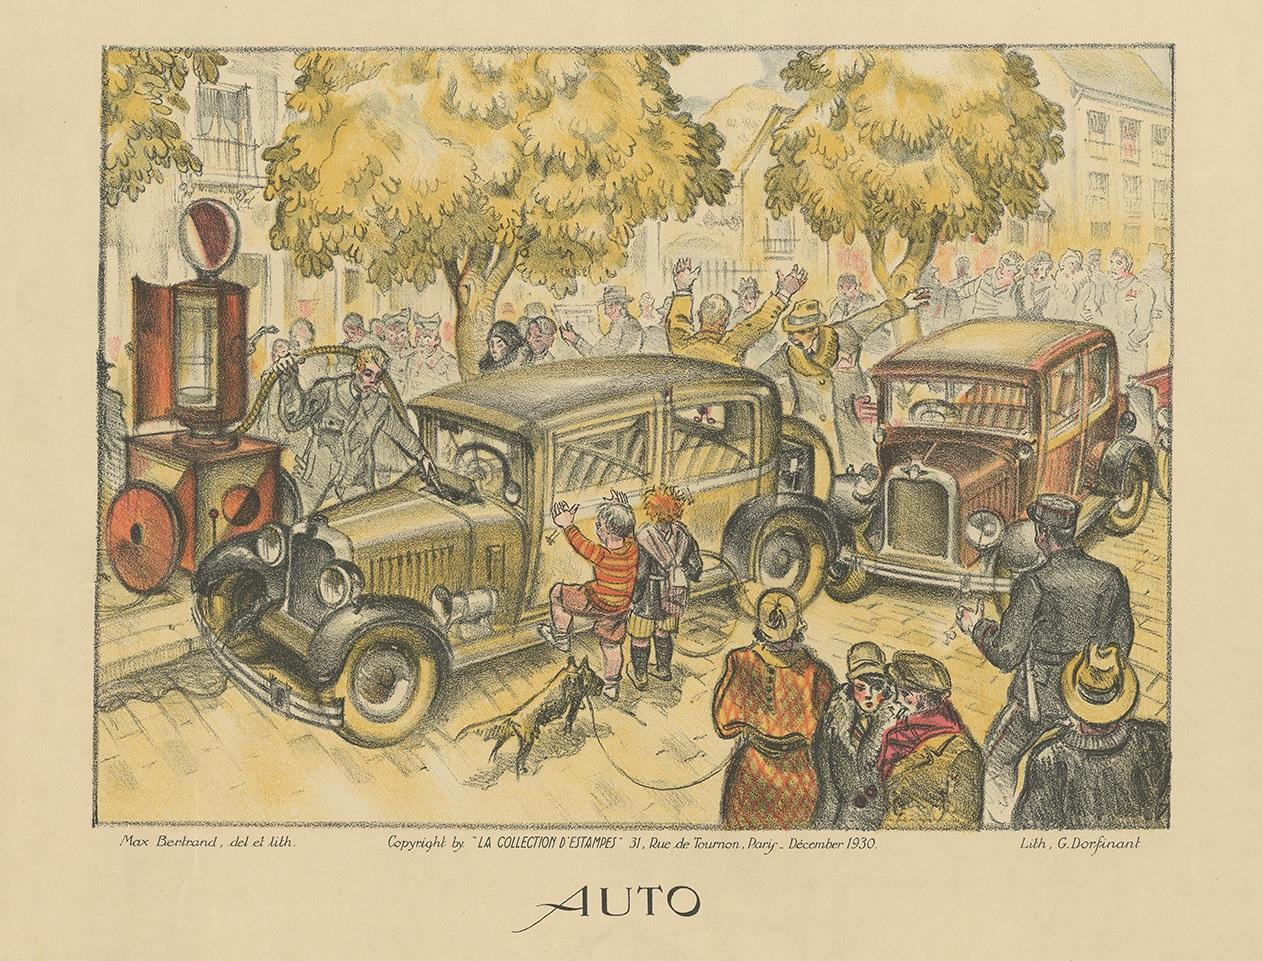 Antique poster depicting various cars and figures. Copyright by 'La Collection d'Estampes' Paris. Lithograph by G. Dorfinant after M. Bertrand.